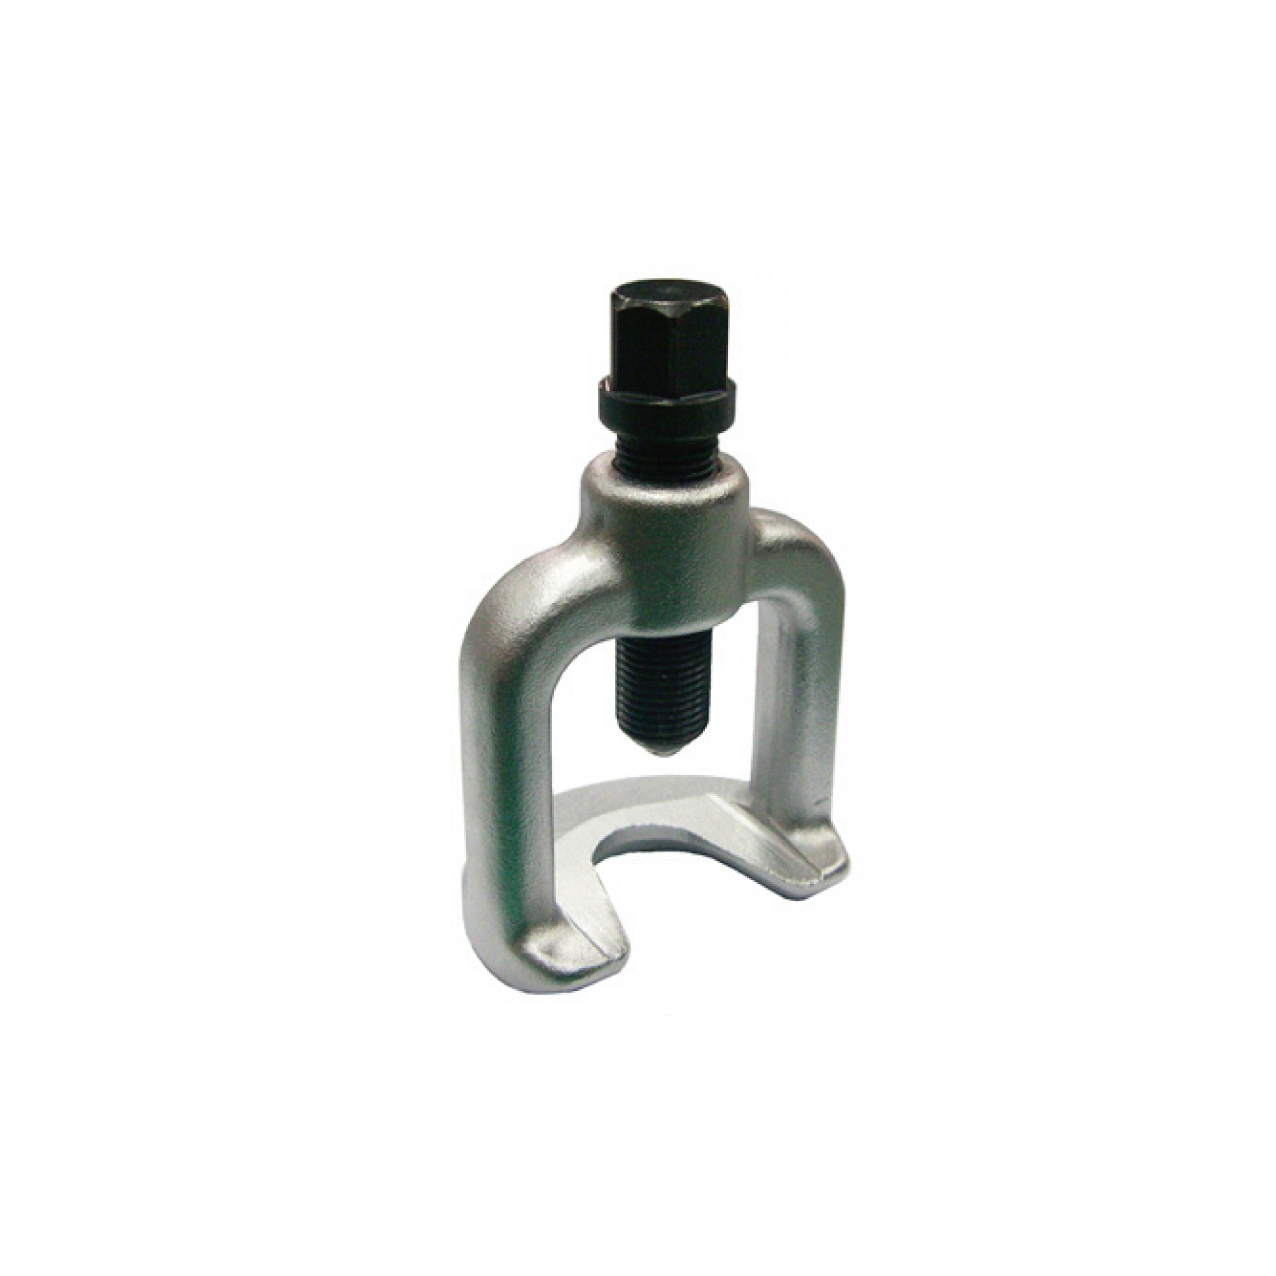 BALL JOINT SEPARATOR (29mm)